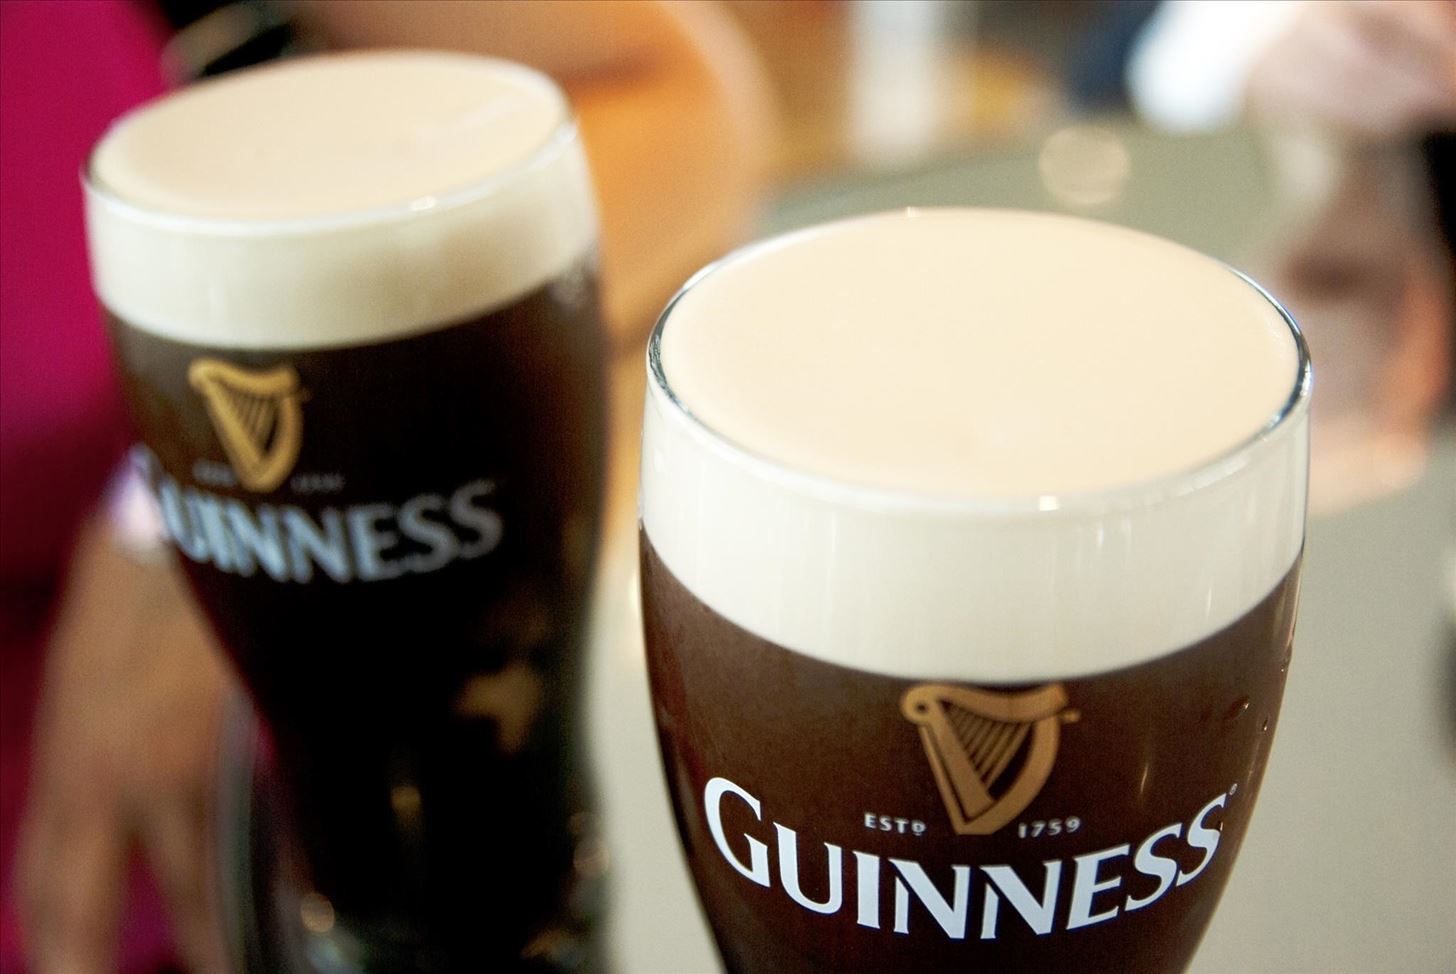 why is guinness stout foam white when the beer is black and what is guinness head made of